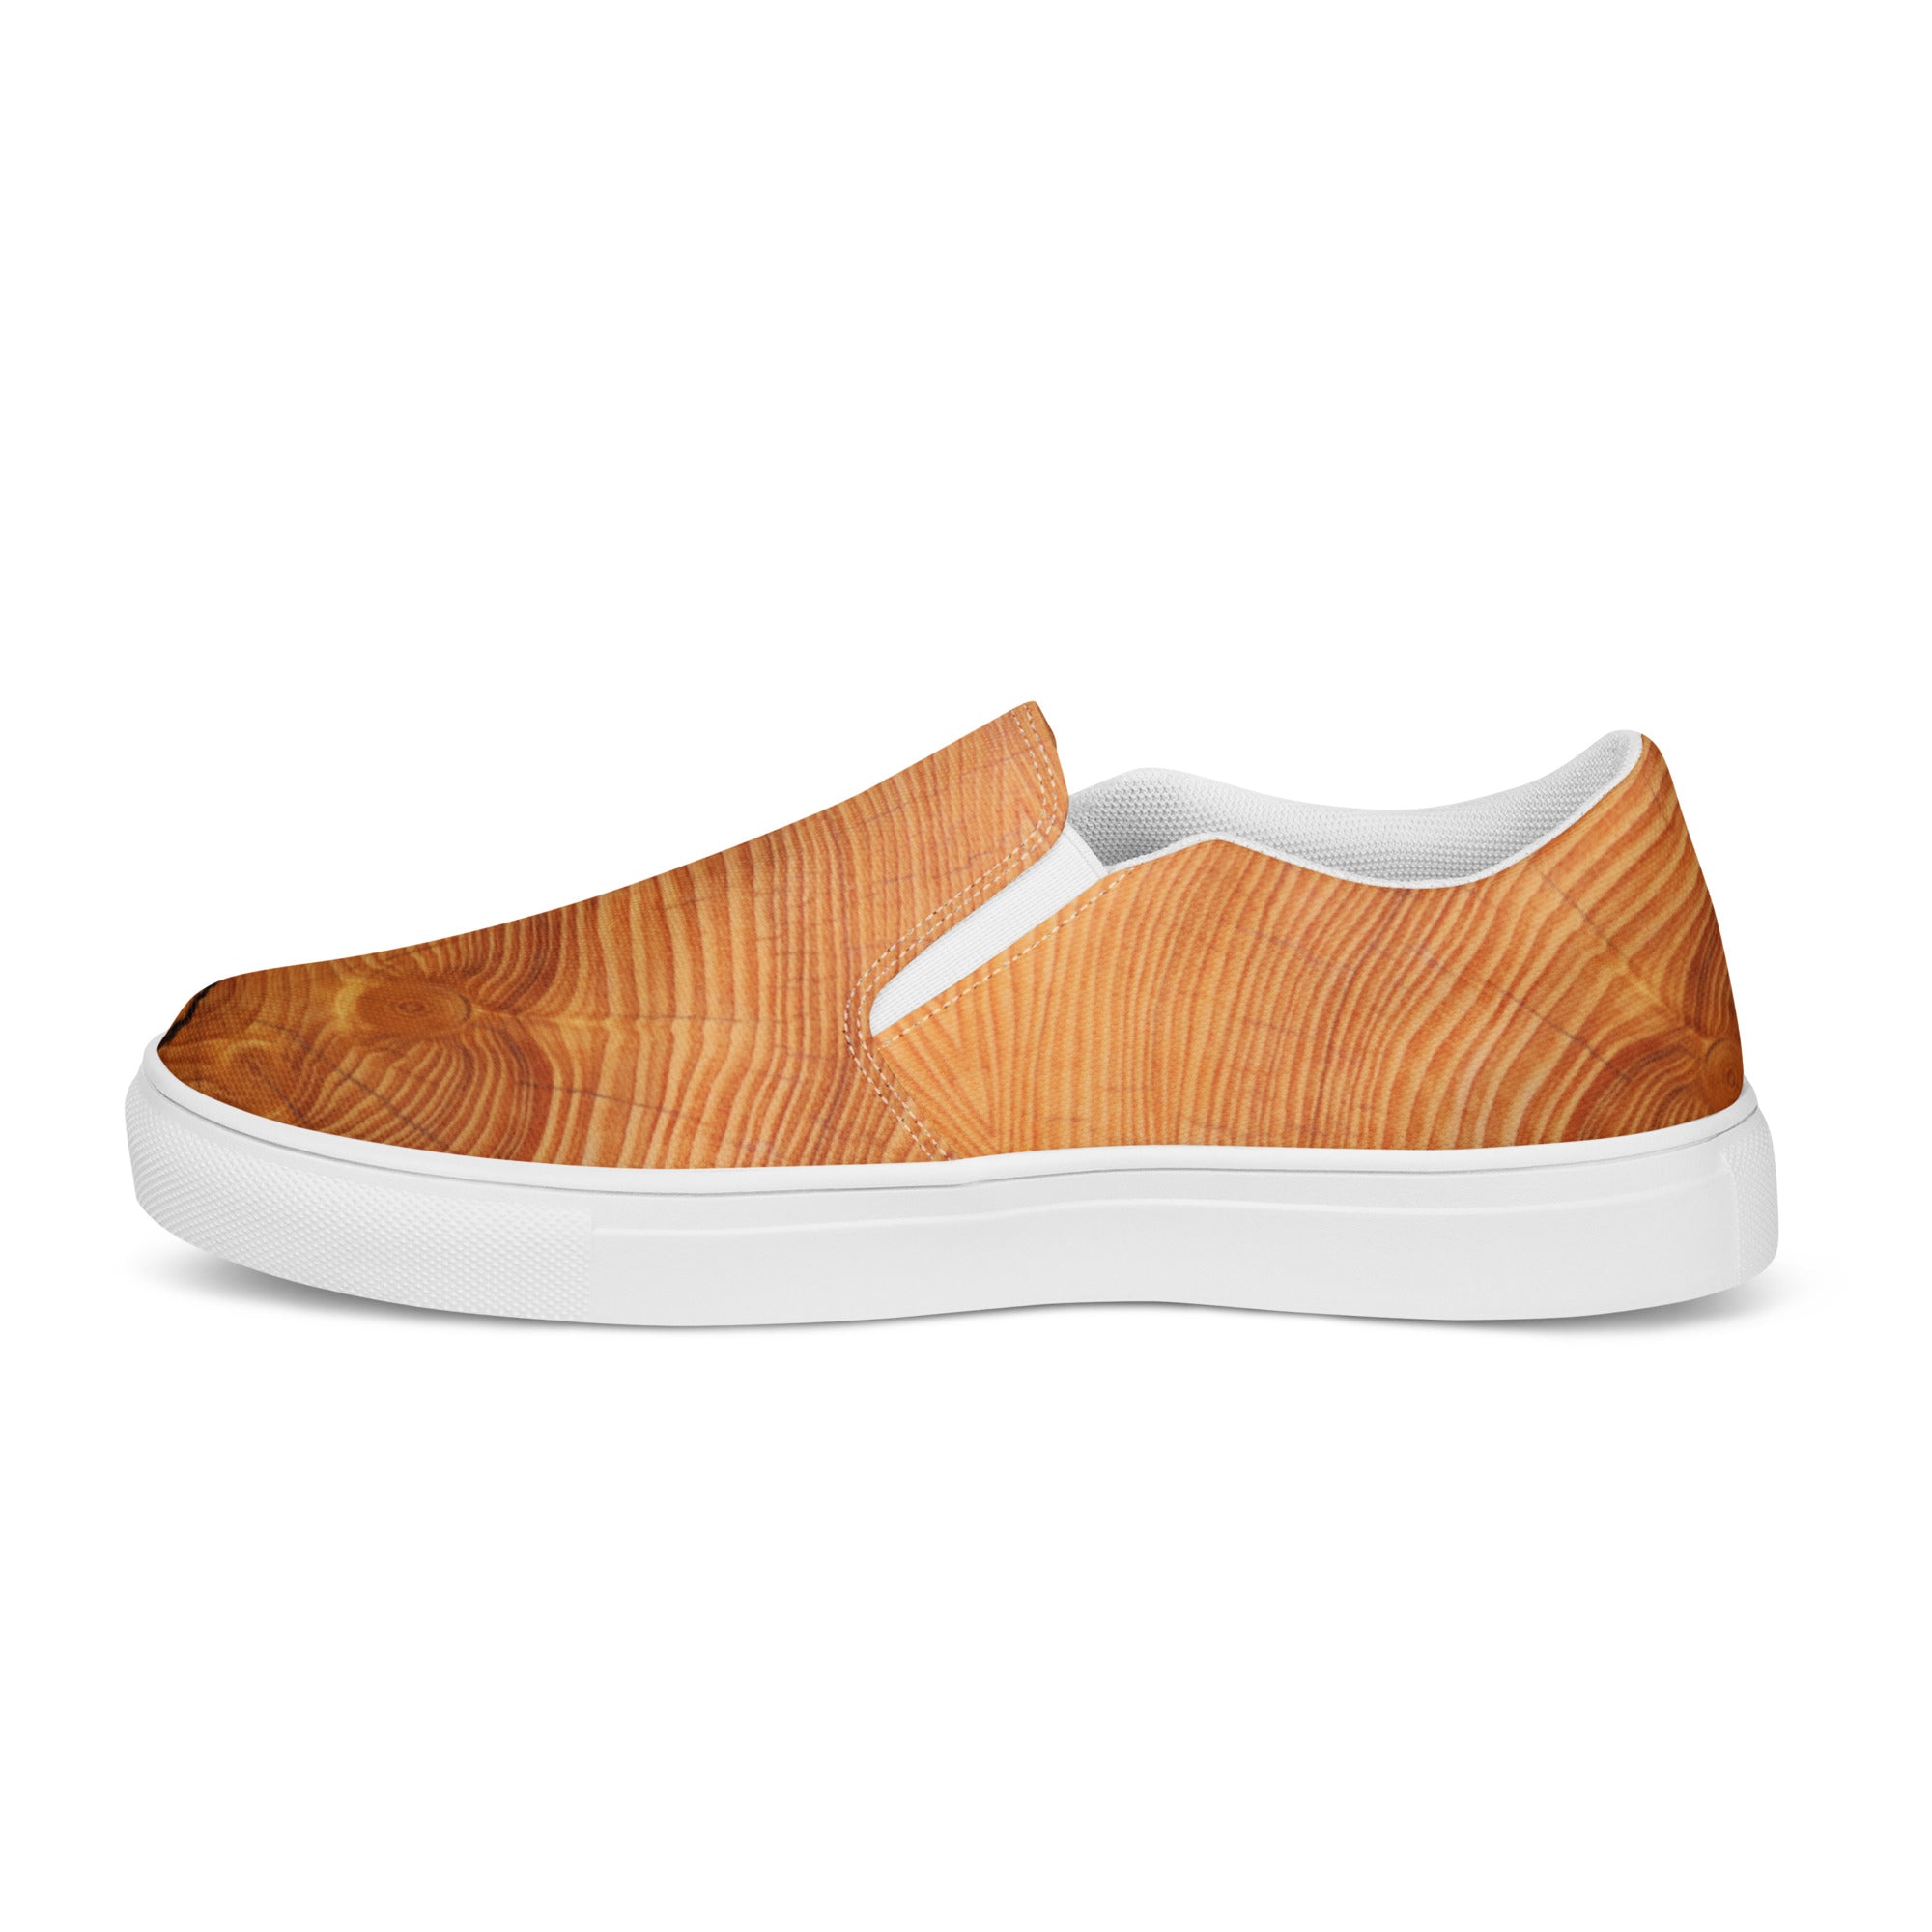 Cracked Wood Pattern Women’s Slip-on Canvas Shoes